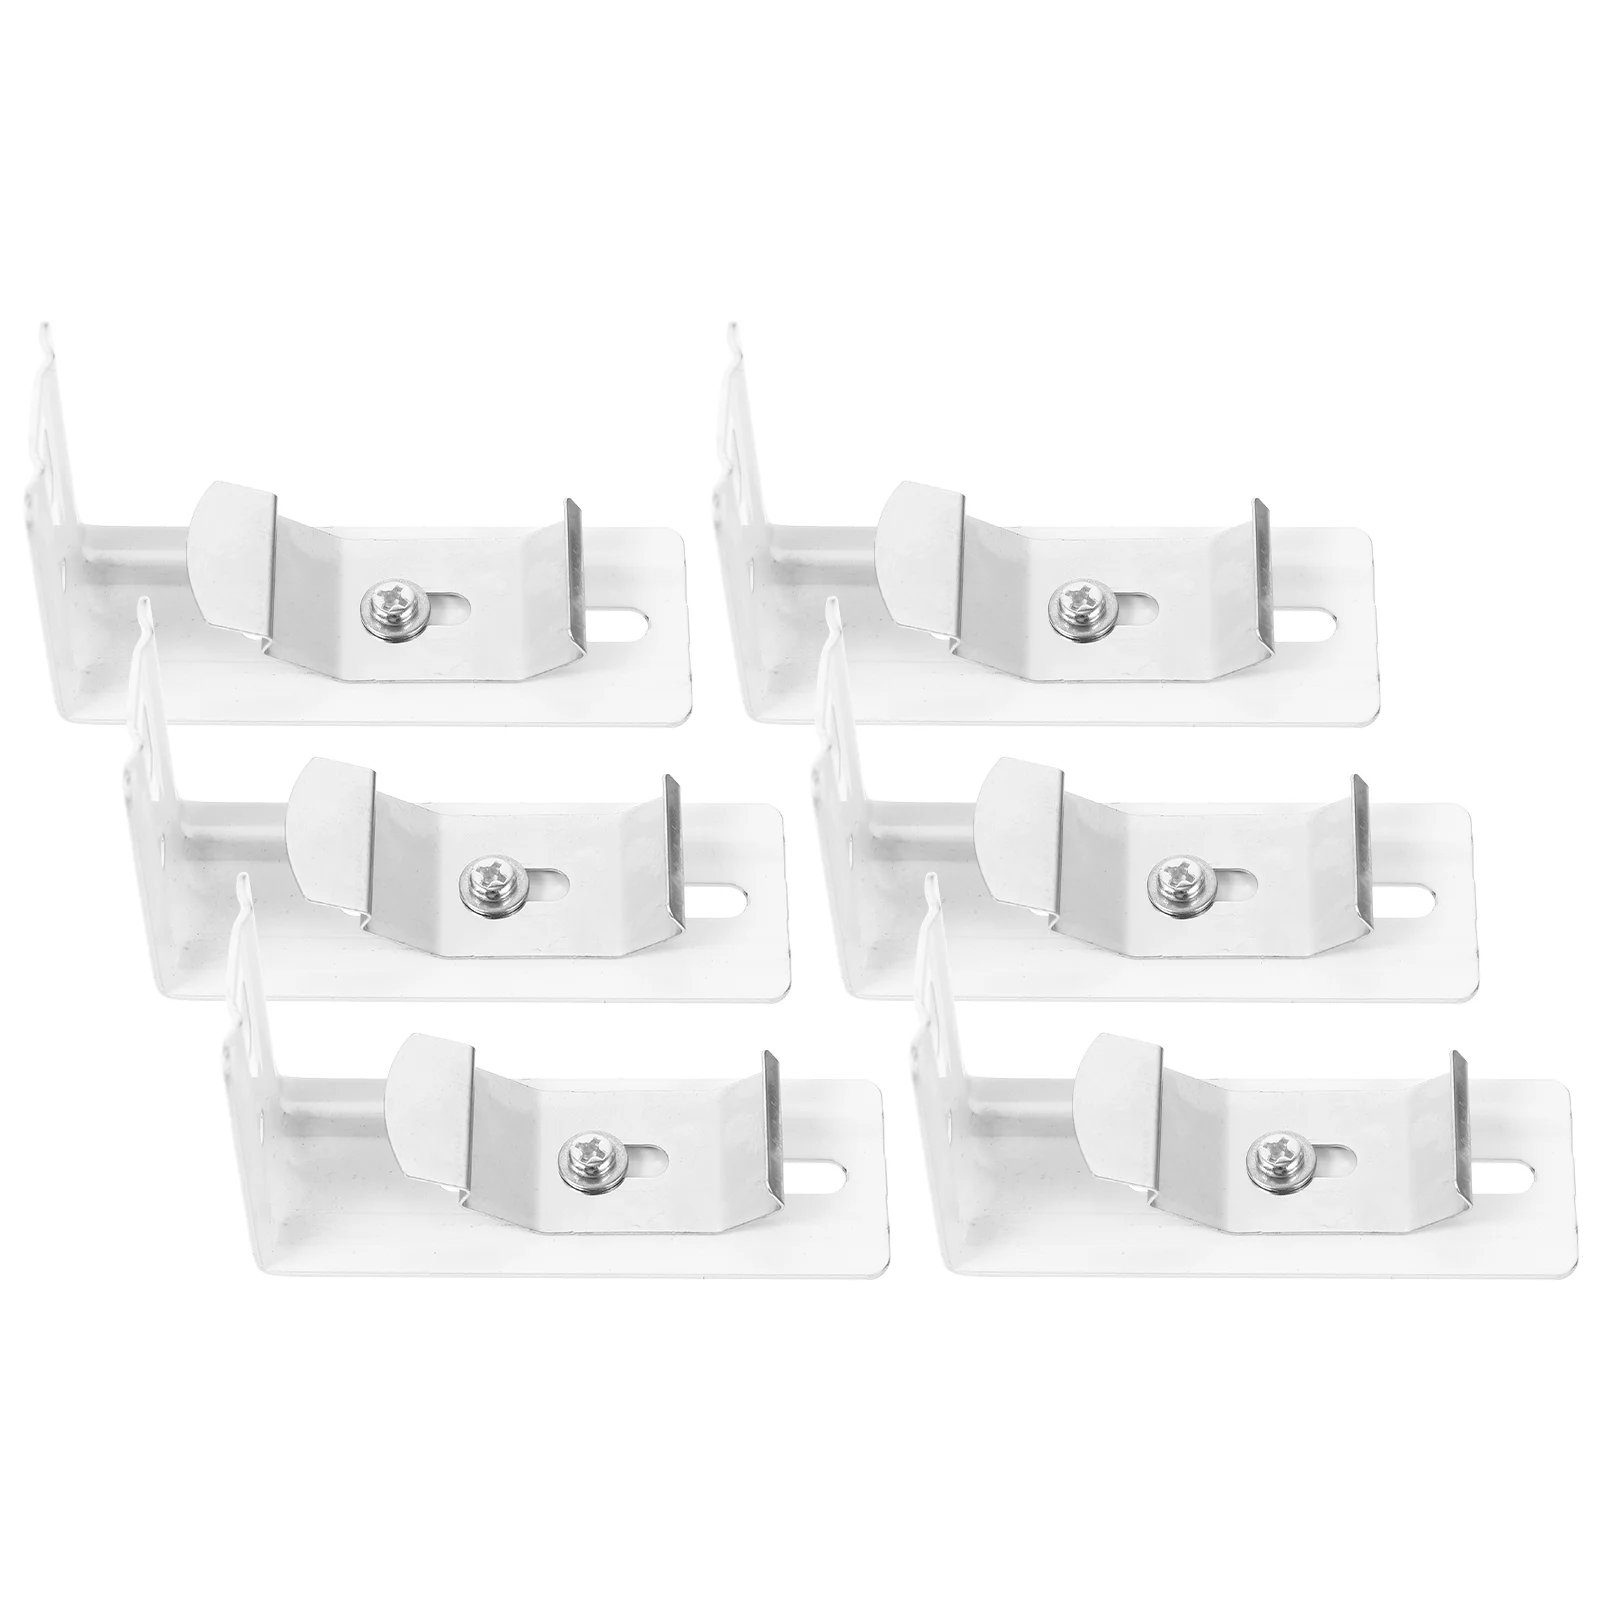 

6 Pcs Vertical Blind Bracket Clip Mounting Brackets Curtain Supplies Home Decor Clips For Valance Metal